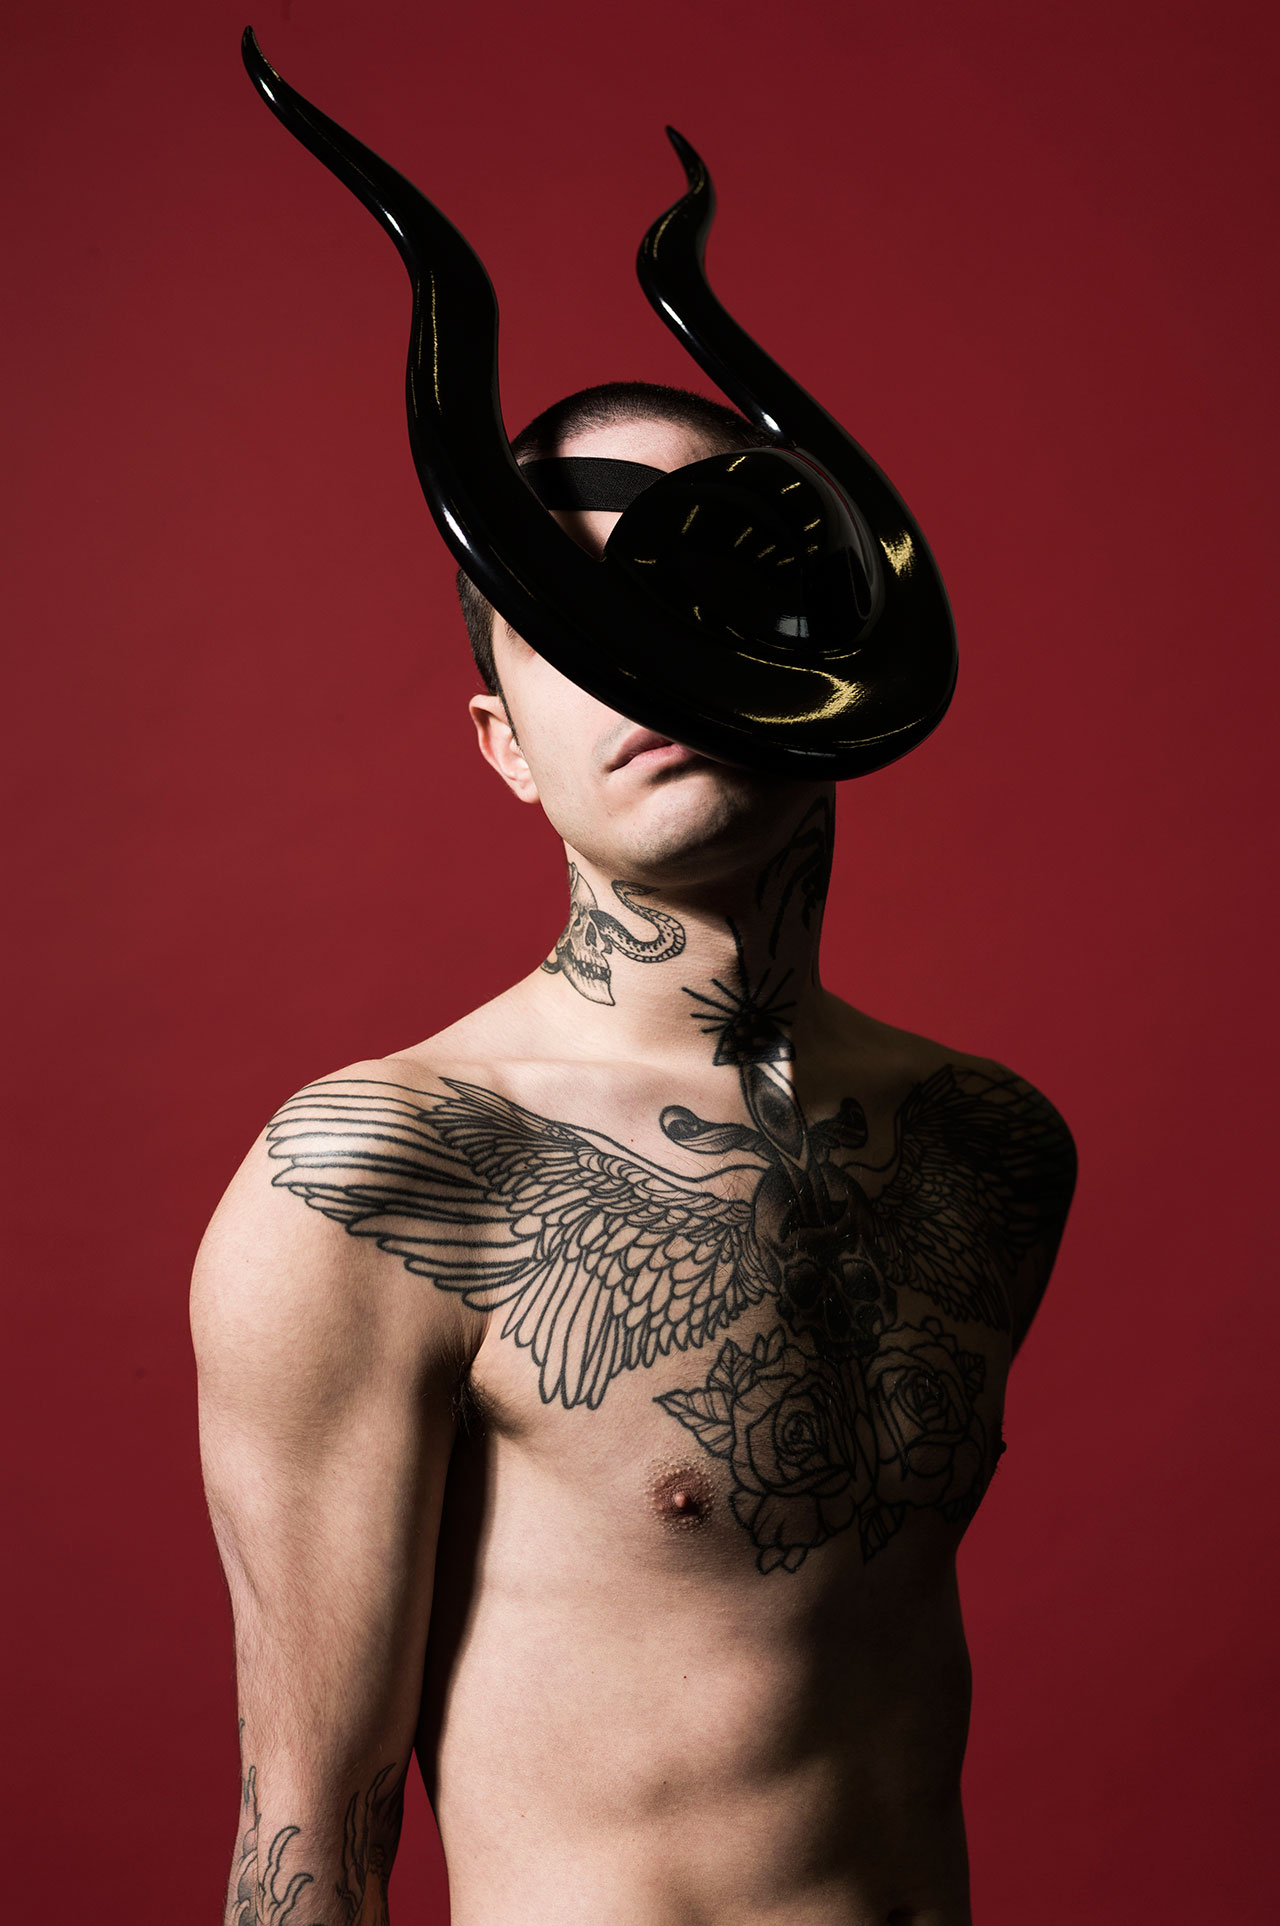 Headpiece by Rein Vollenga. Photography by Jonas Lindström, courtesy the artist. 